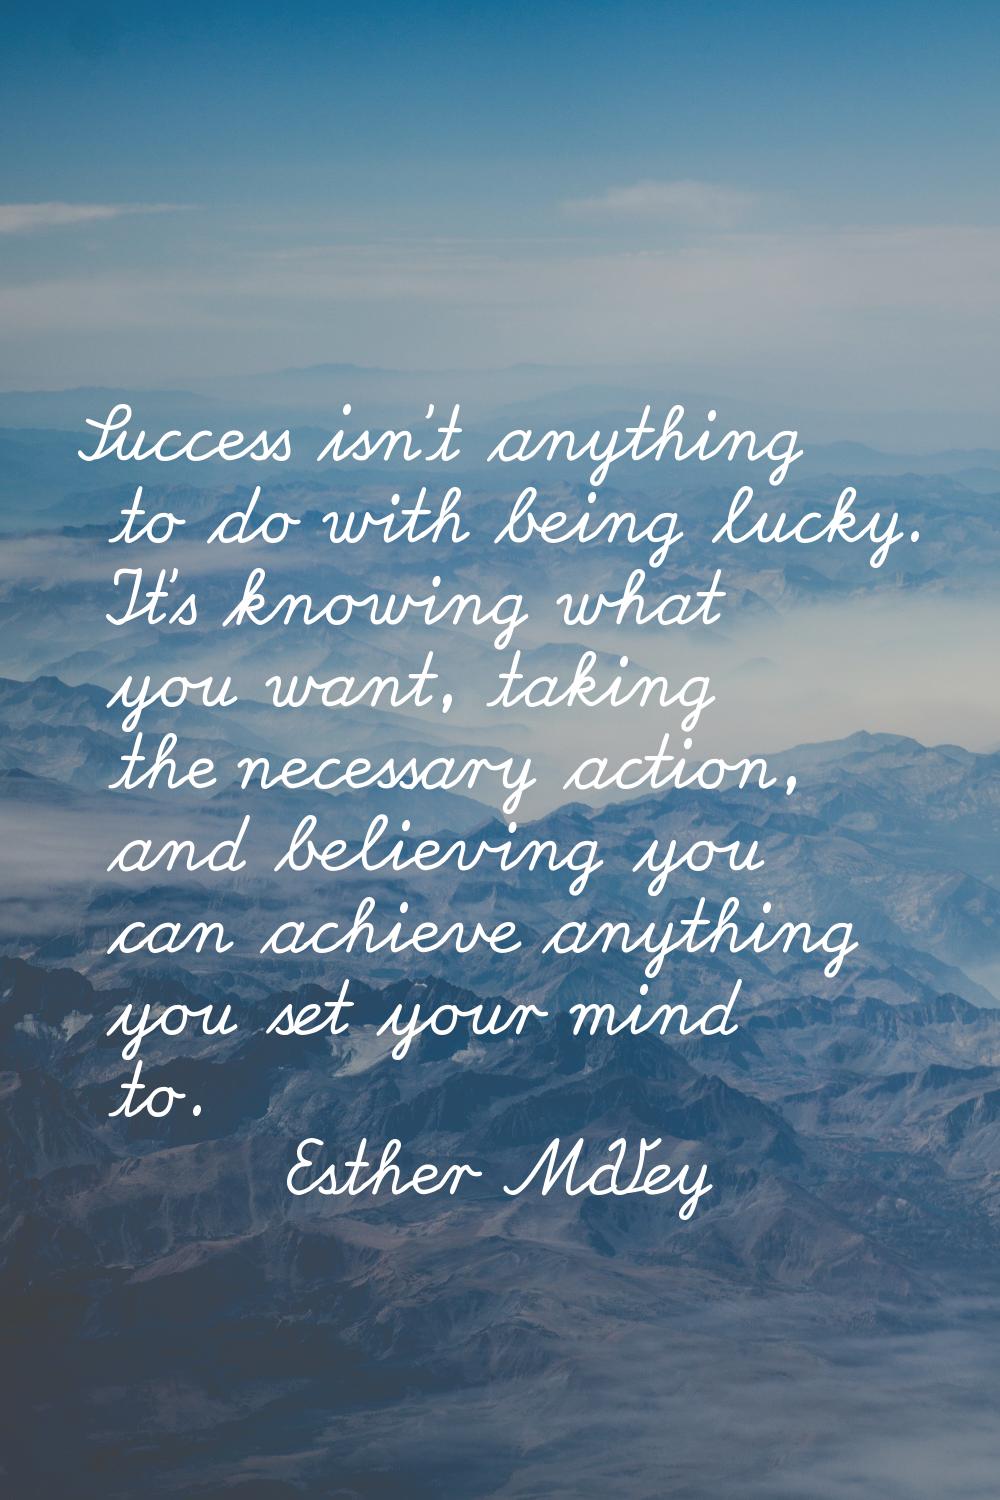 Success isn't anything to do with being lucky. It's knowing what you want, taking the necessary act